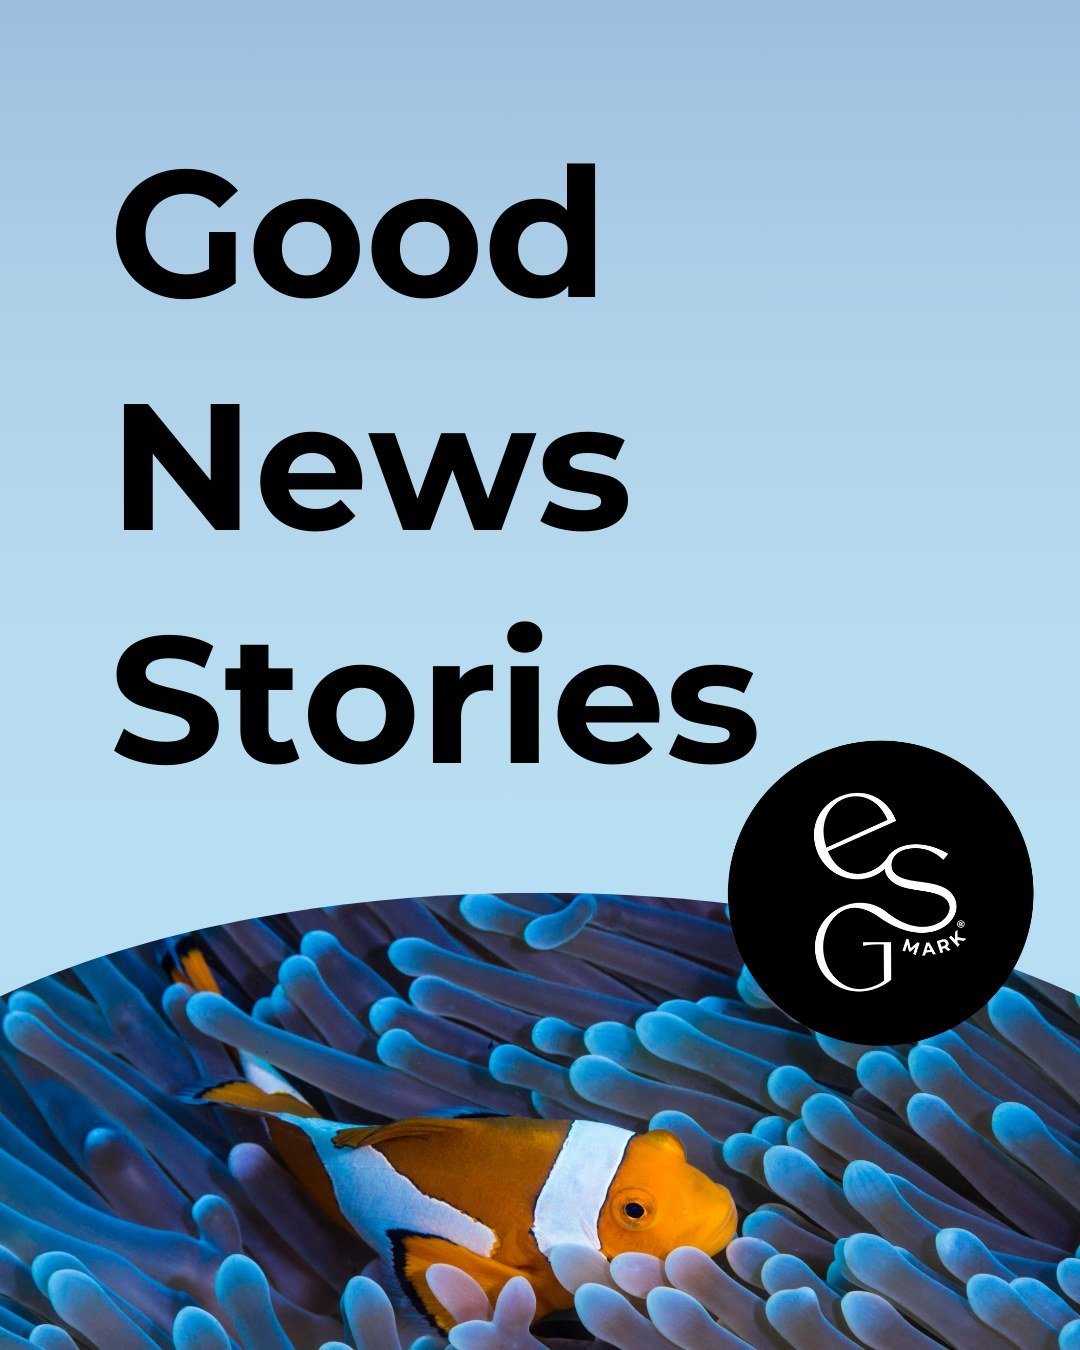 Here's some good news to see you into the weekend! ⁠
⁠
These are some recent updates from the world of environmental action, including new research and actions to protect biodiversity and reduce our environmental impact 🦋⁠
⁠
⁠
⁠
#goodnews #climateac